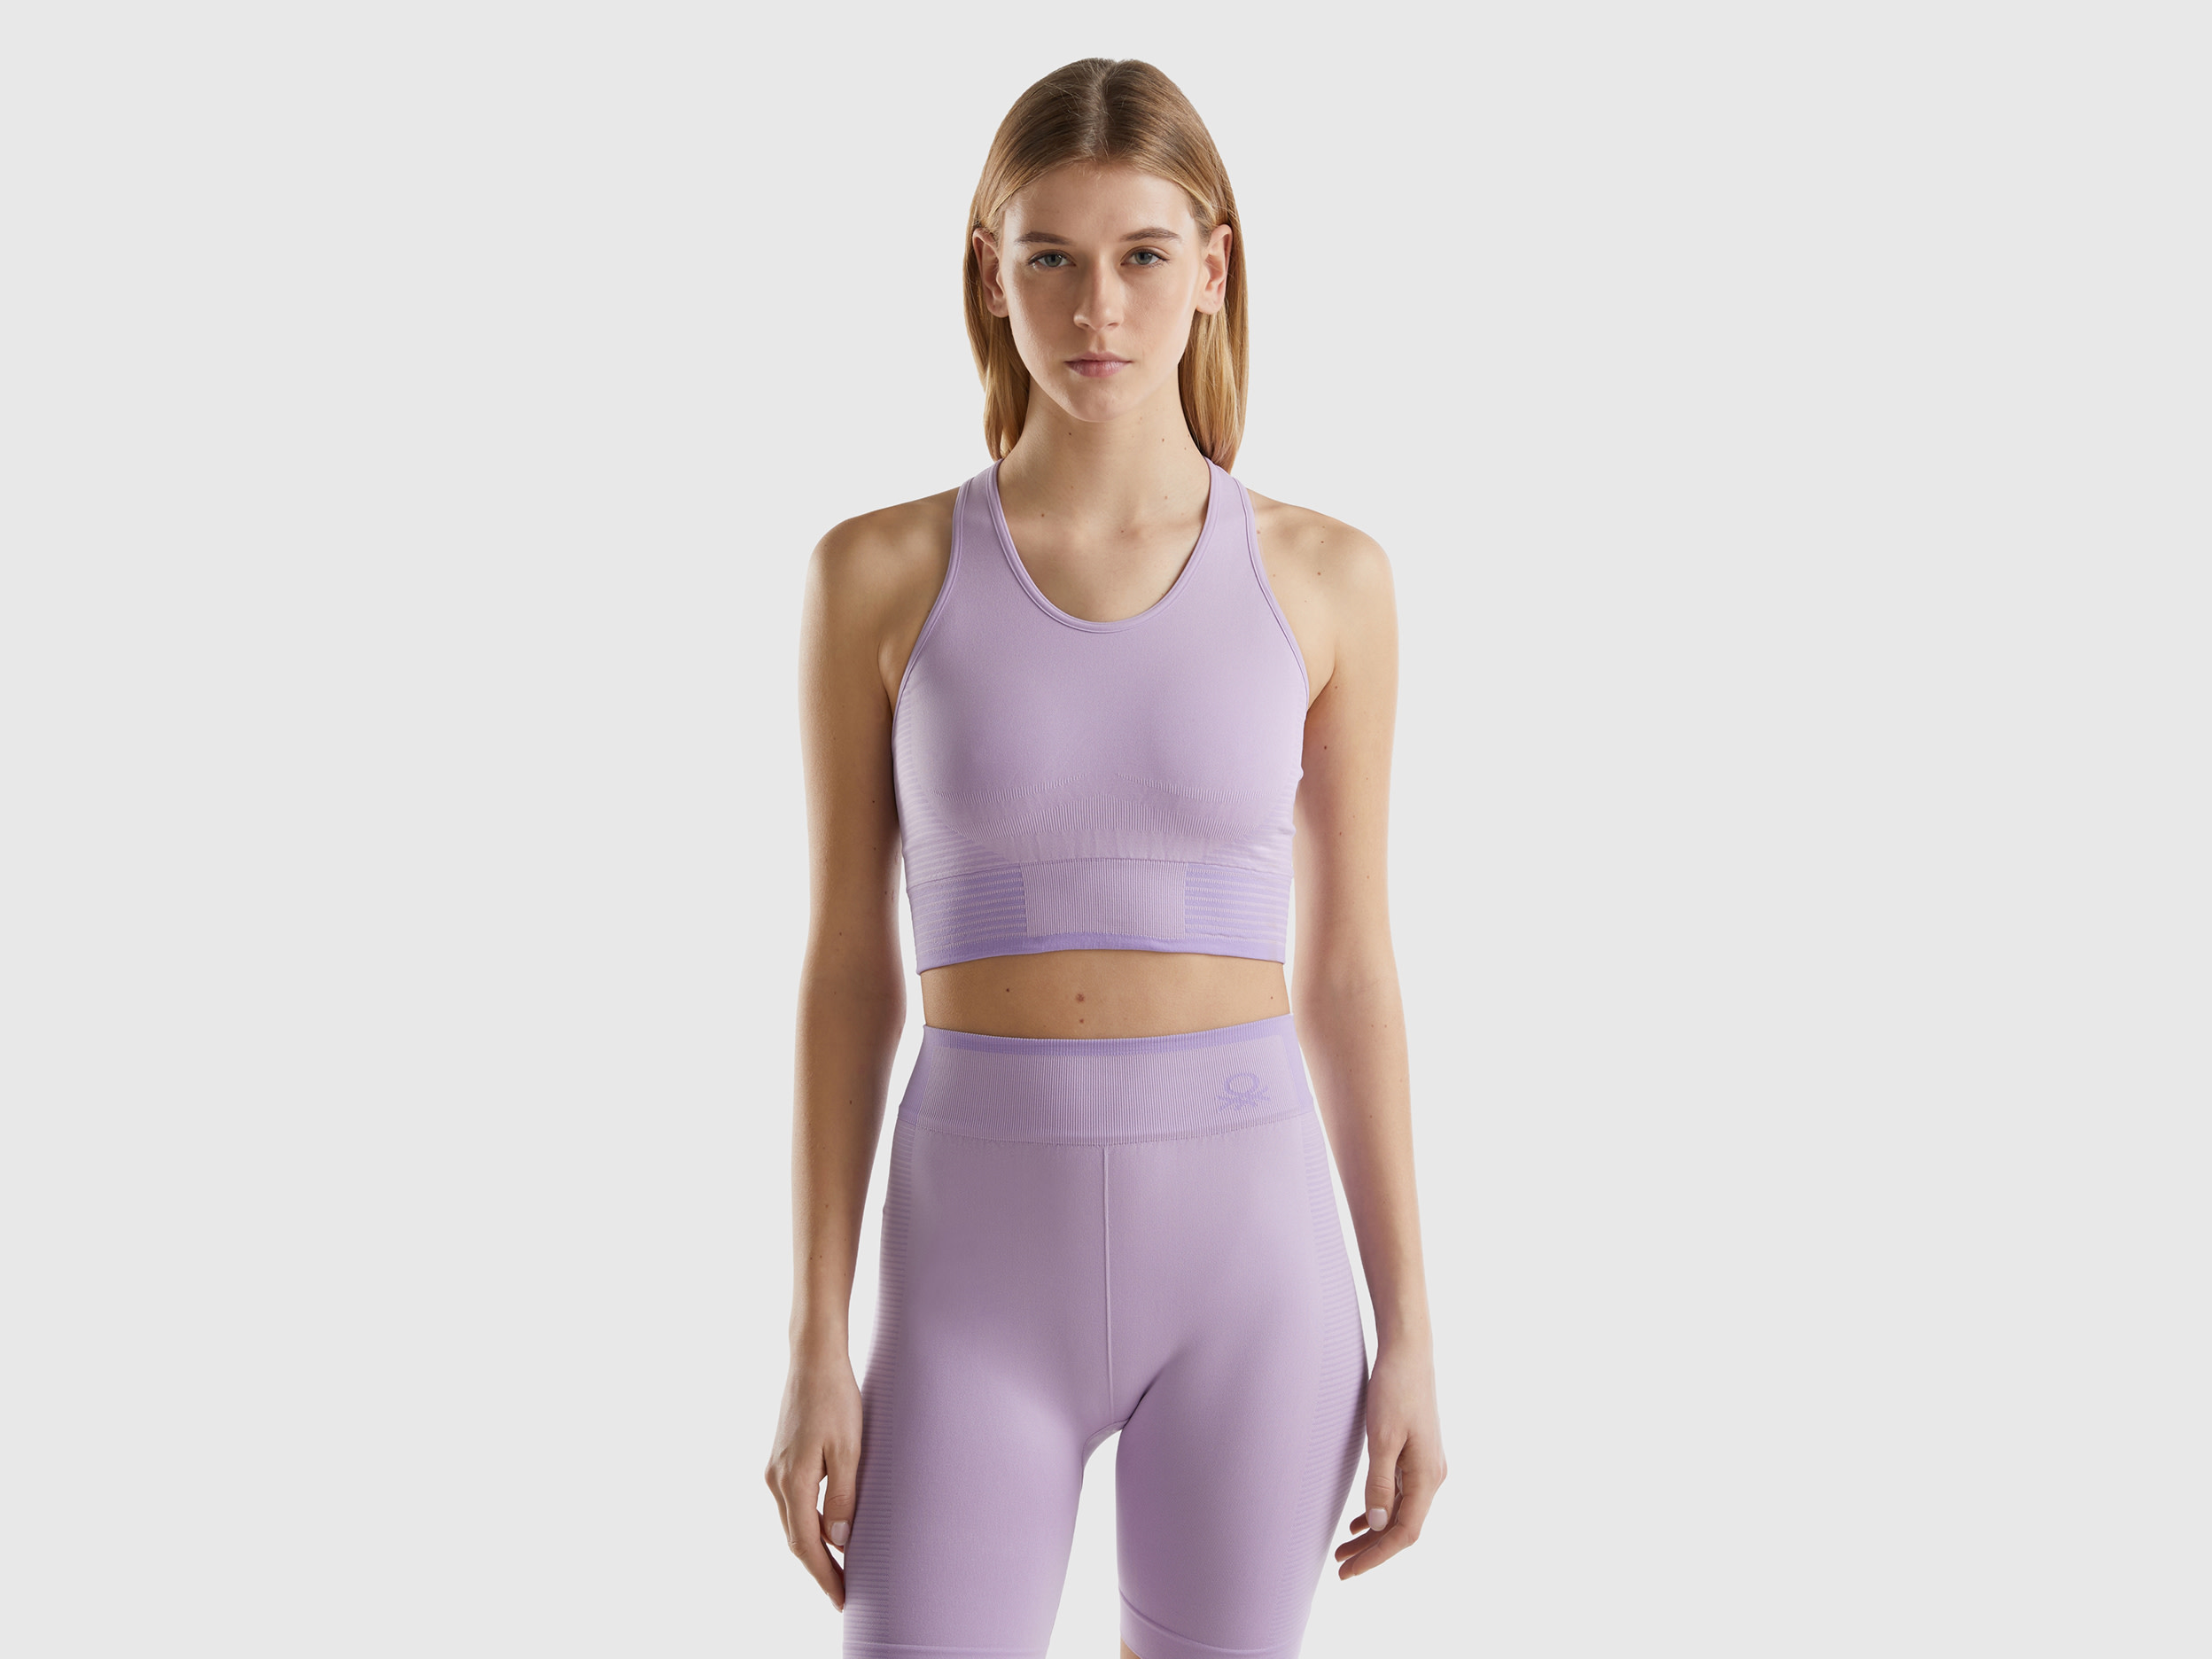 Image of Benetton, Seamless Sports Crop Top, size L, Lilac, Women